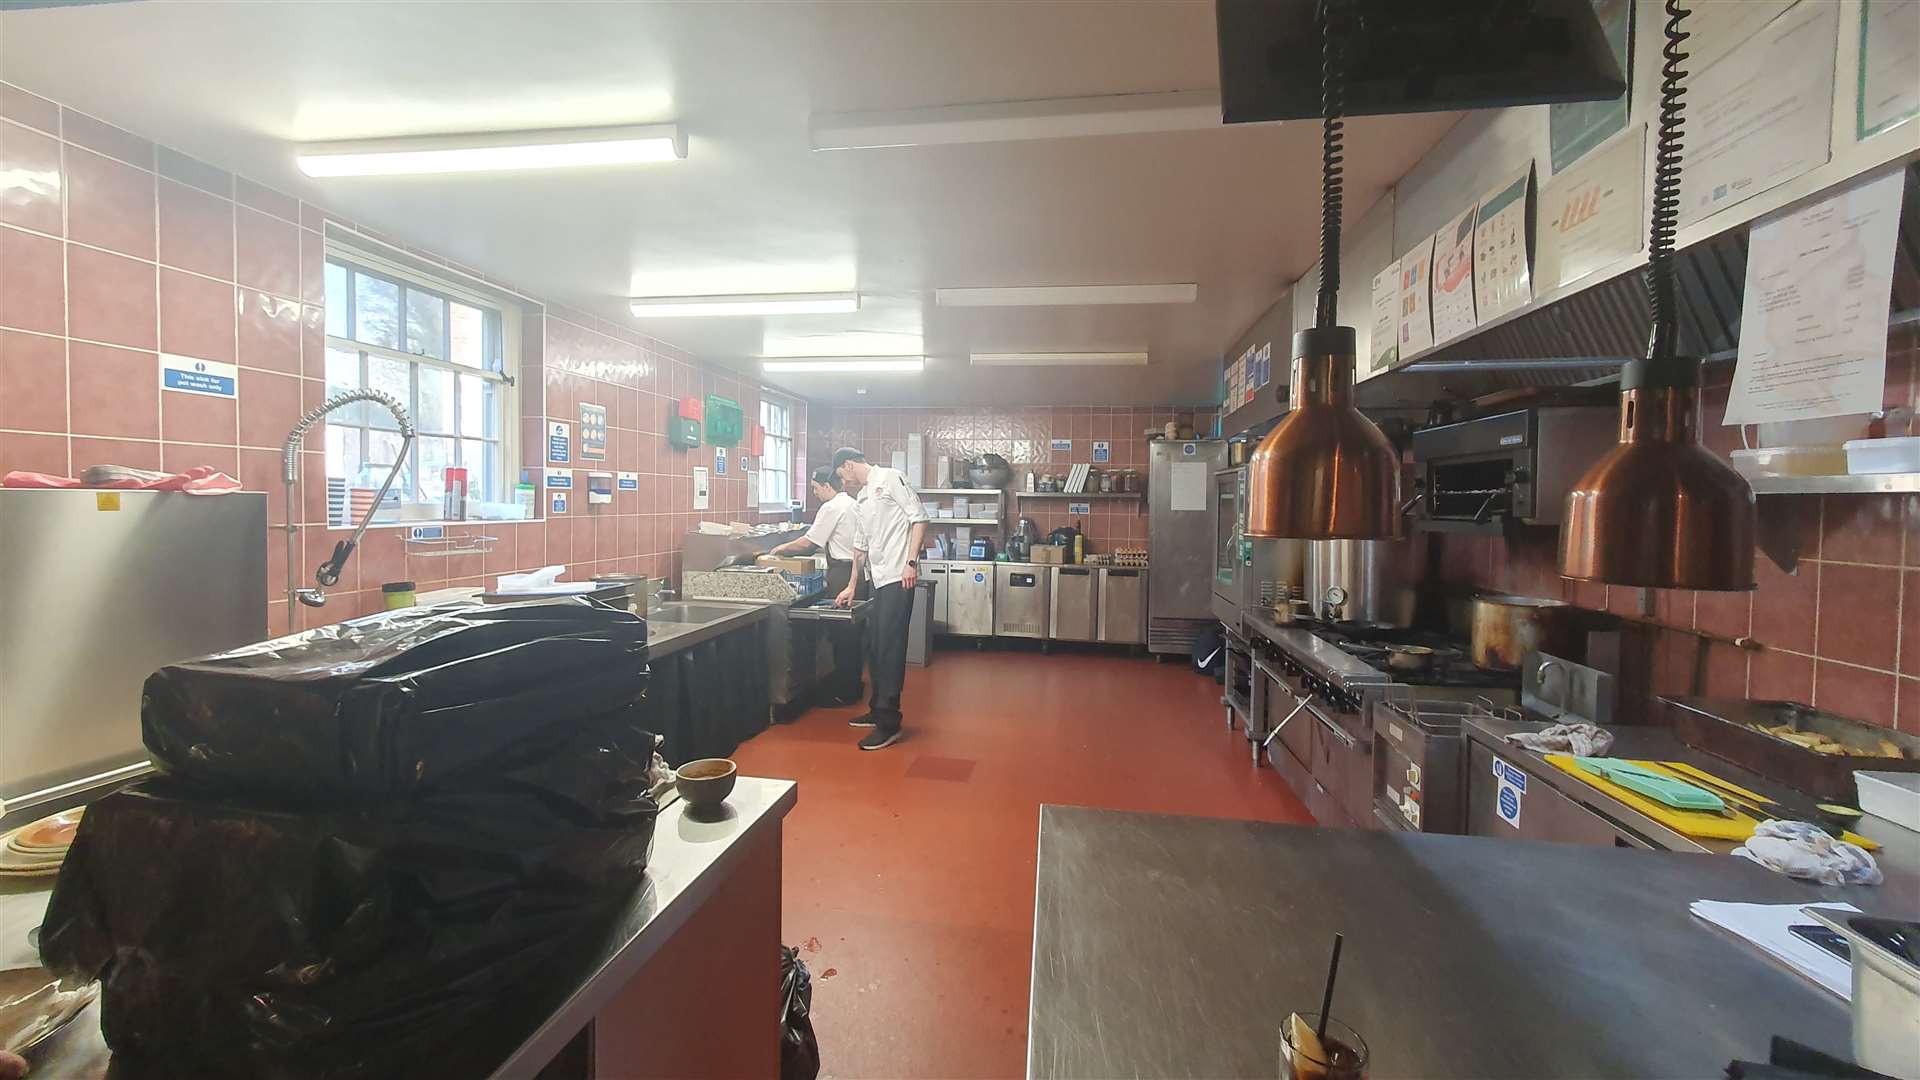 The kitchen in The King's Head